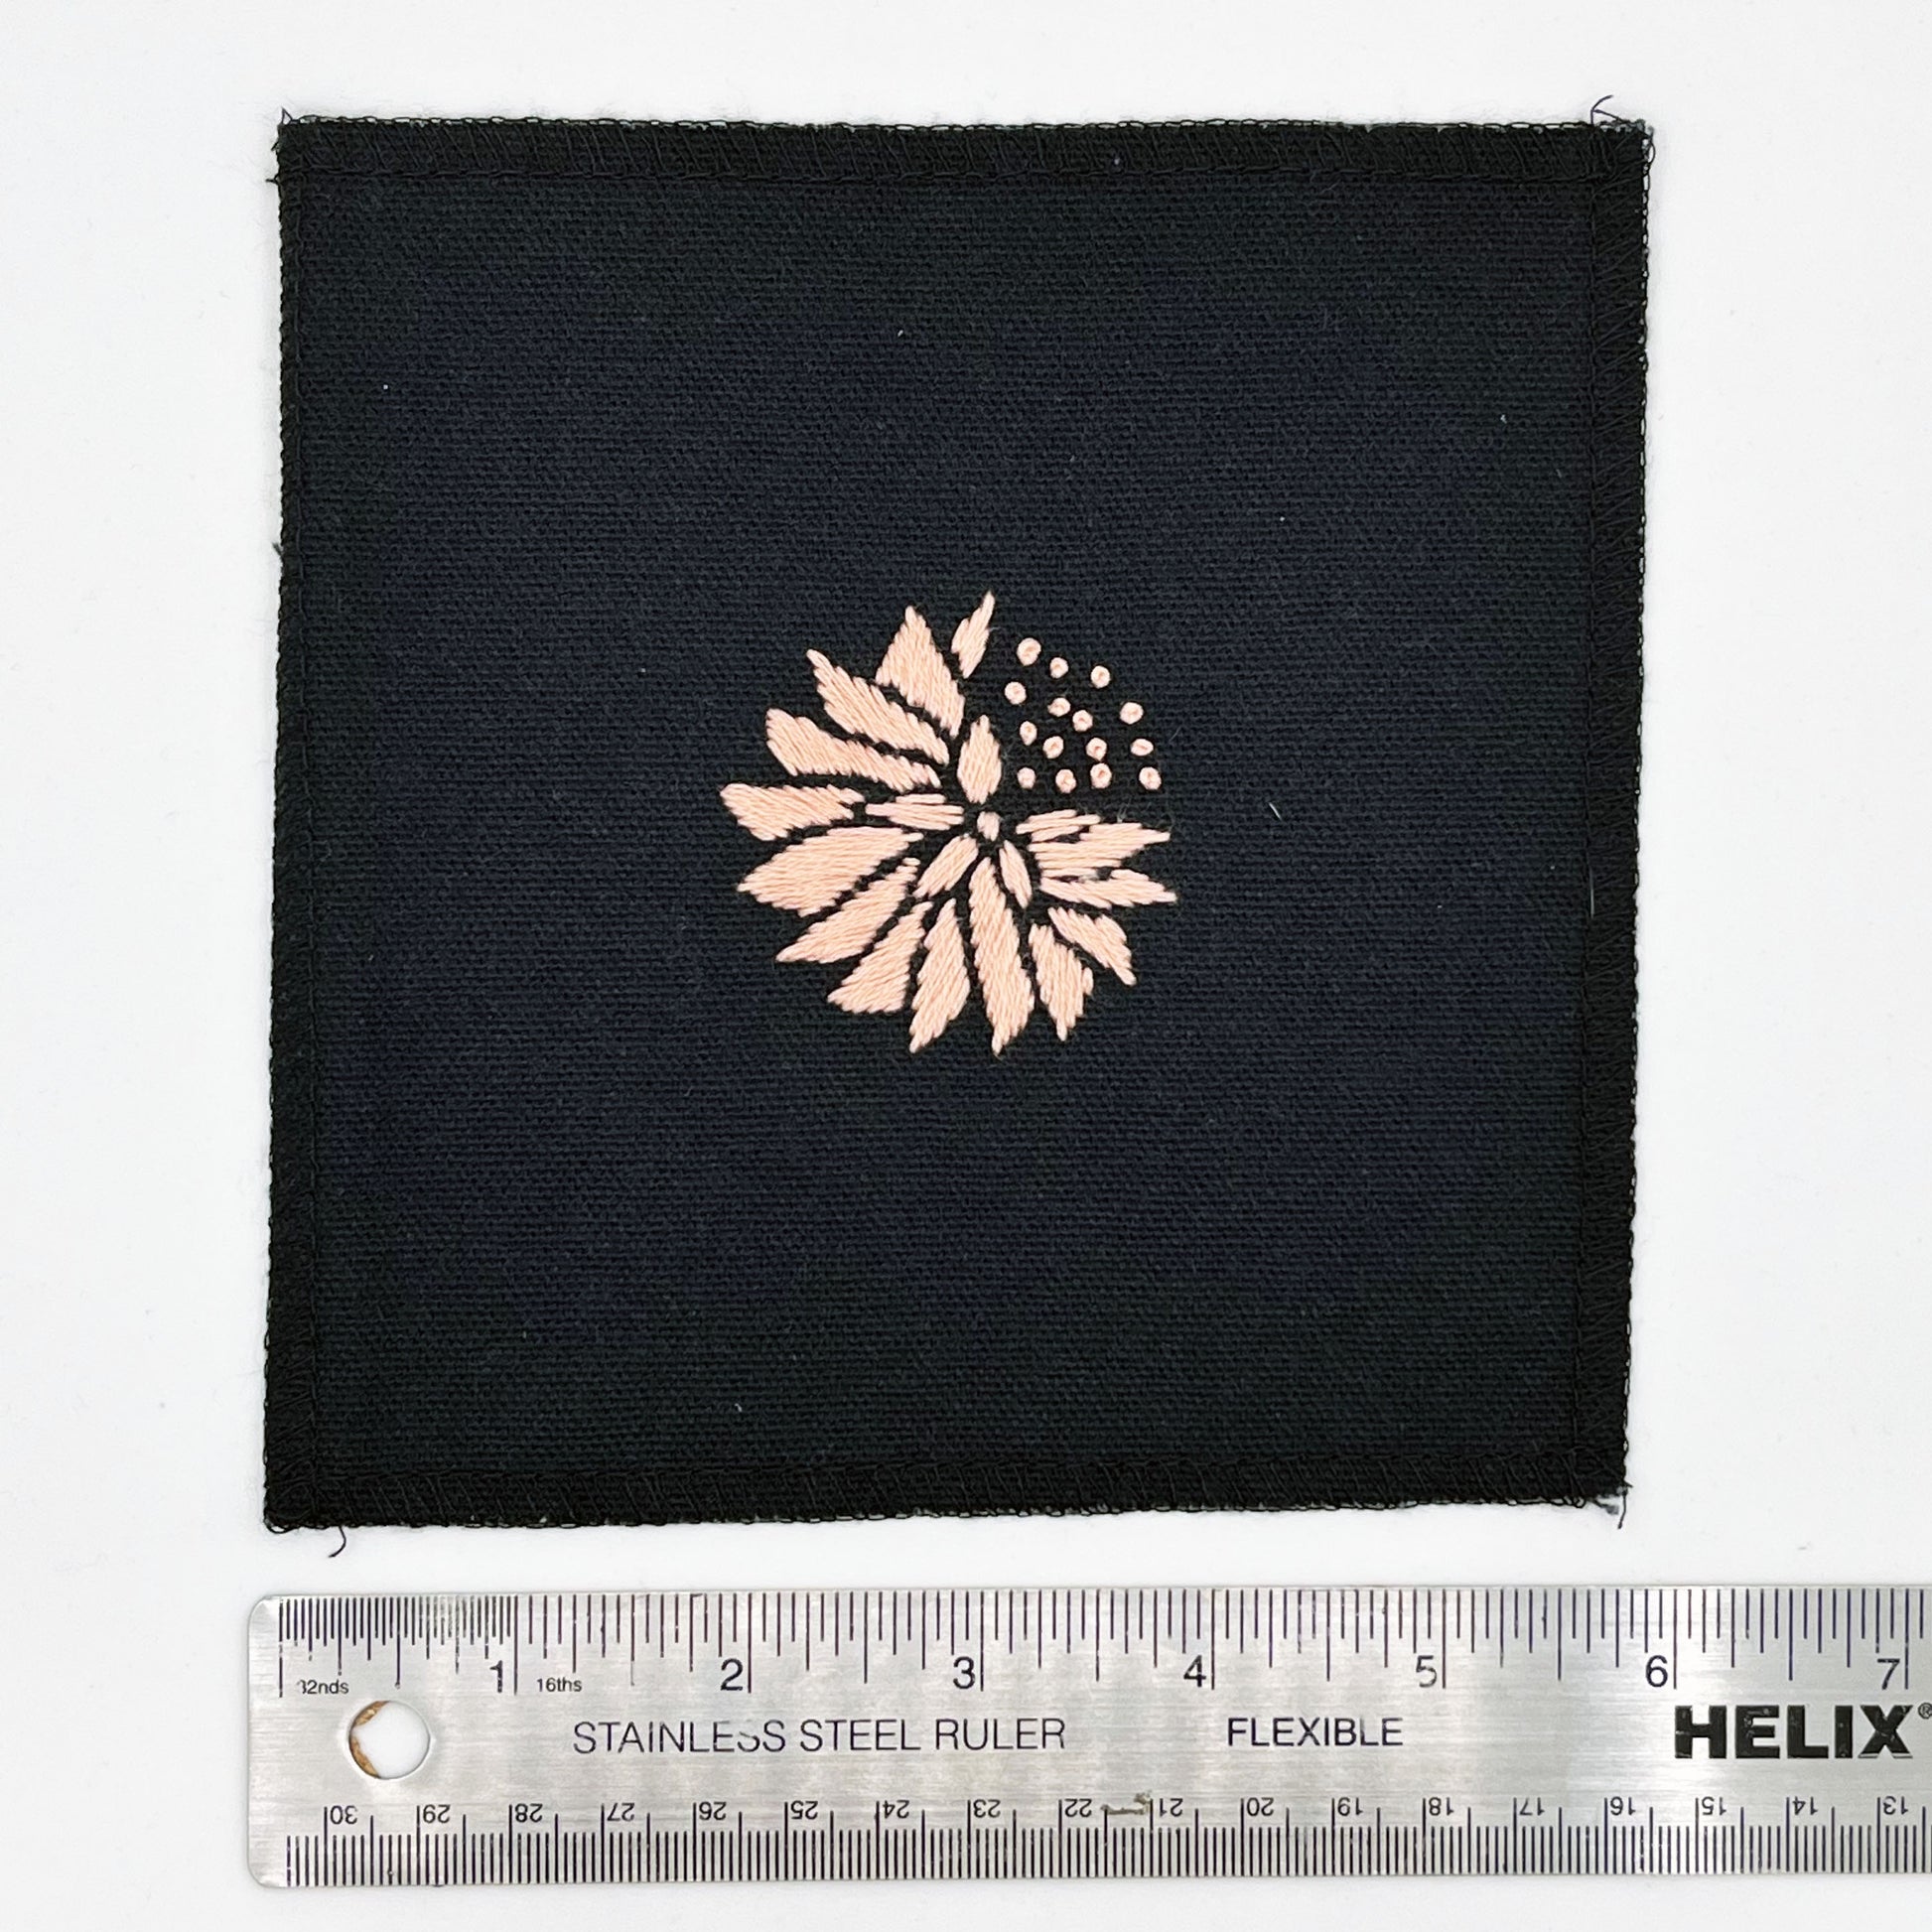 a square patch in black fabric, hand embroidered with a peach colored abstract dandelion made mostly of petals, with a quarter of them replaced with french knots, with overlocked edges, next to a metal ruler to show a width of six inches